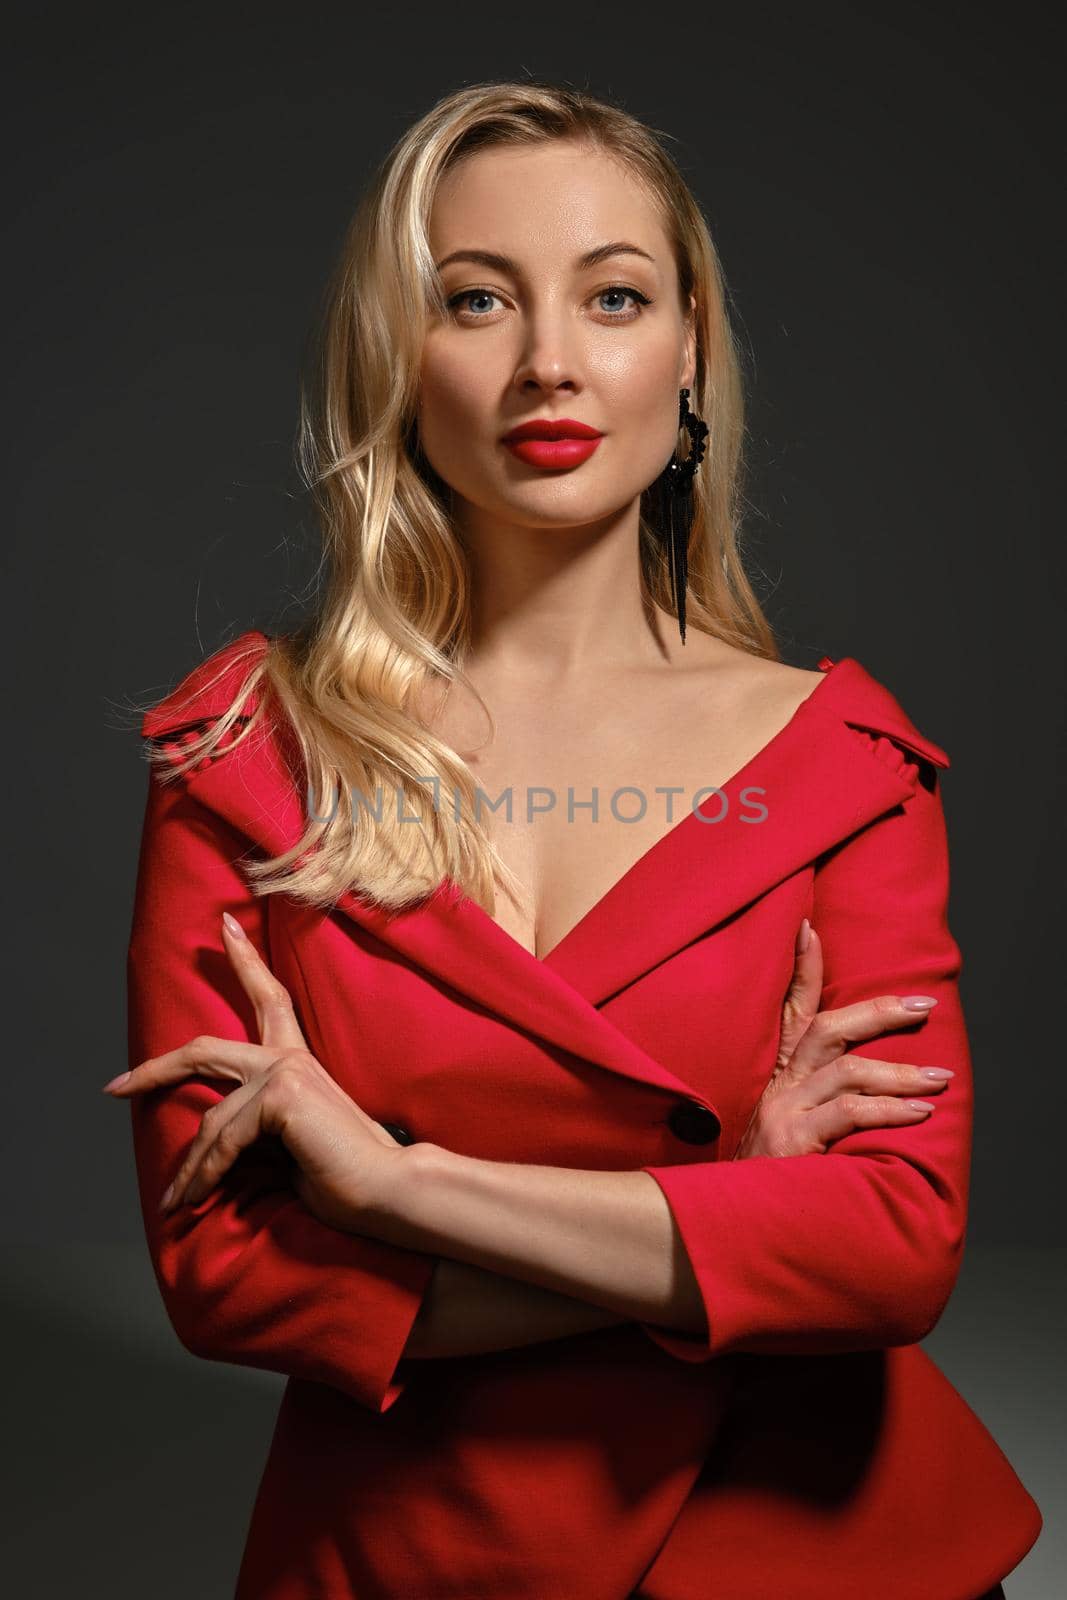 Blonde female with deep neckline, hands folded, in red dress and black earrings. She is smiling, posing on gray background. Copy space, close up by nazarovsergey